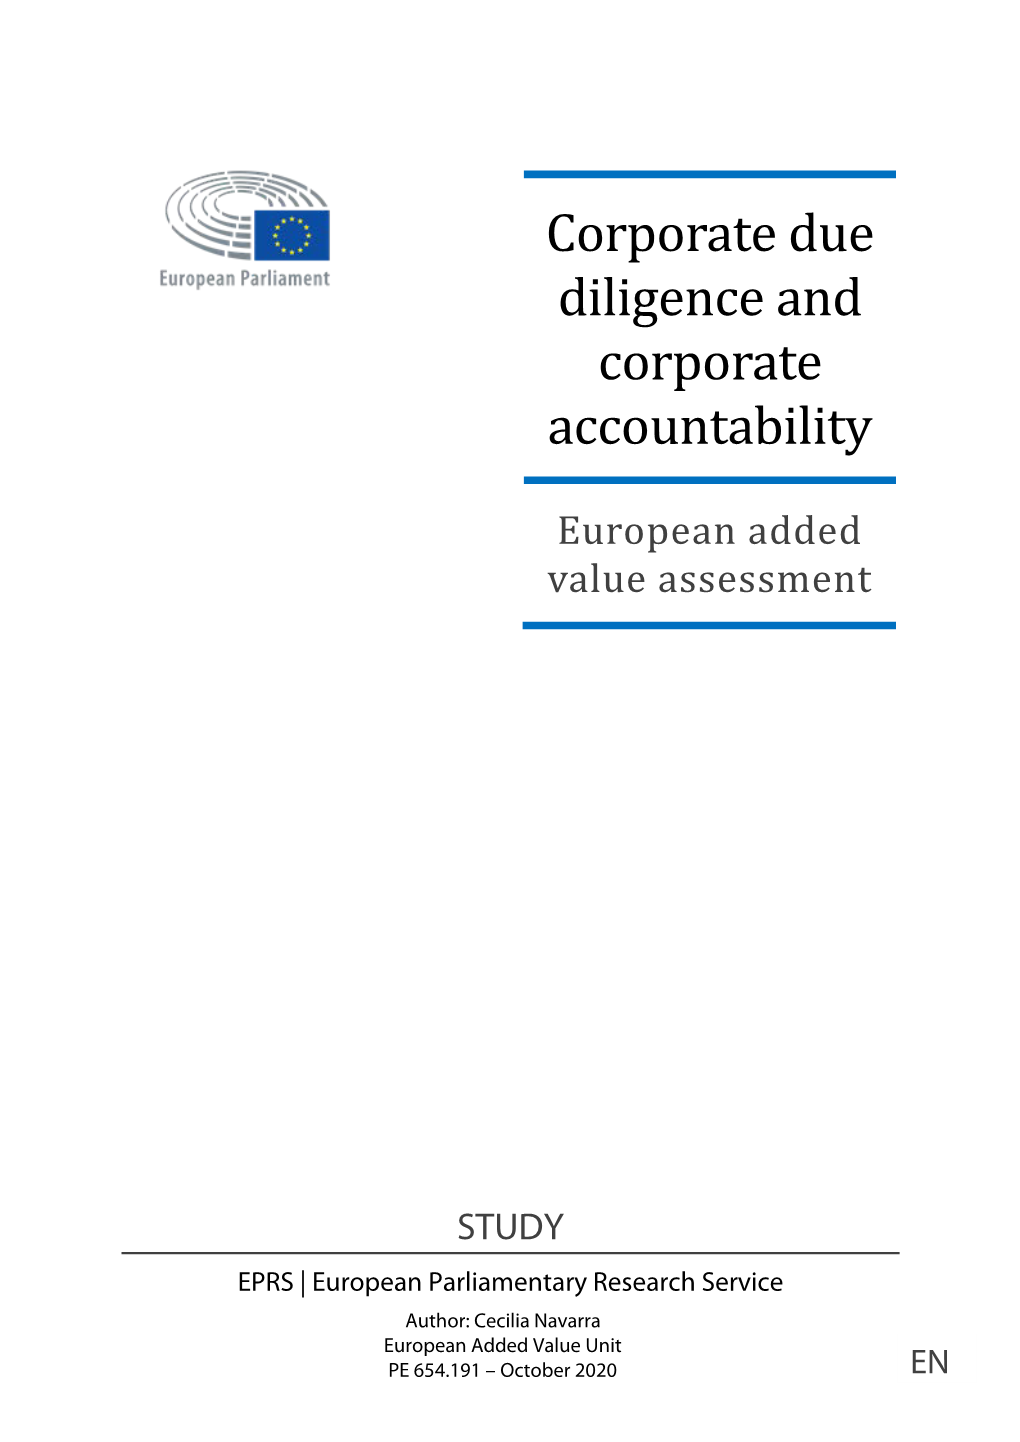 EPRS Study: Corporate Due Diligence and Corporate Accountability